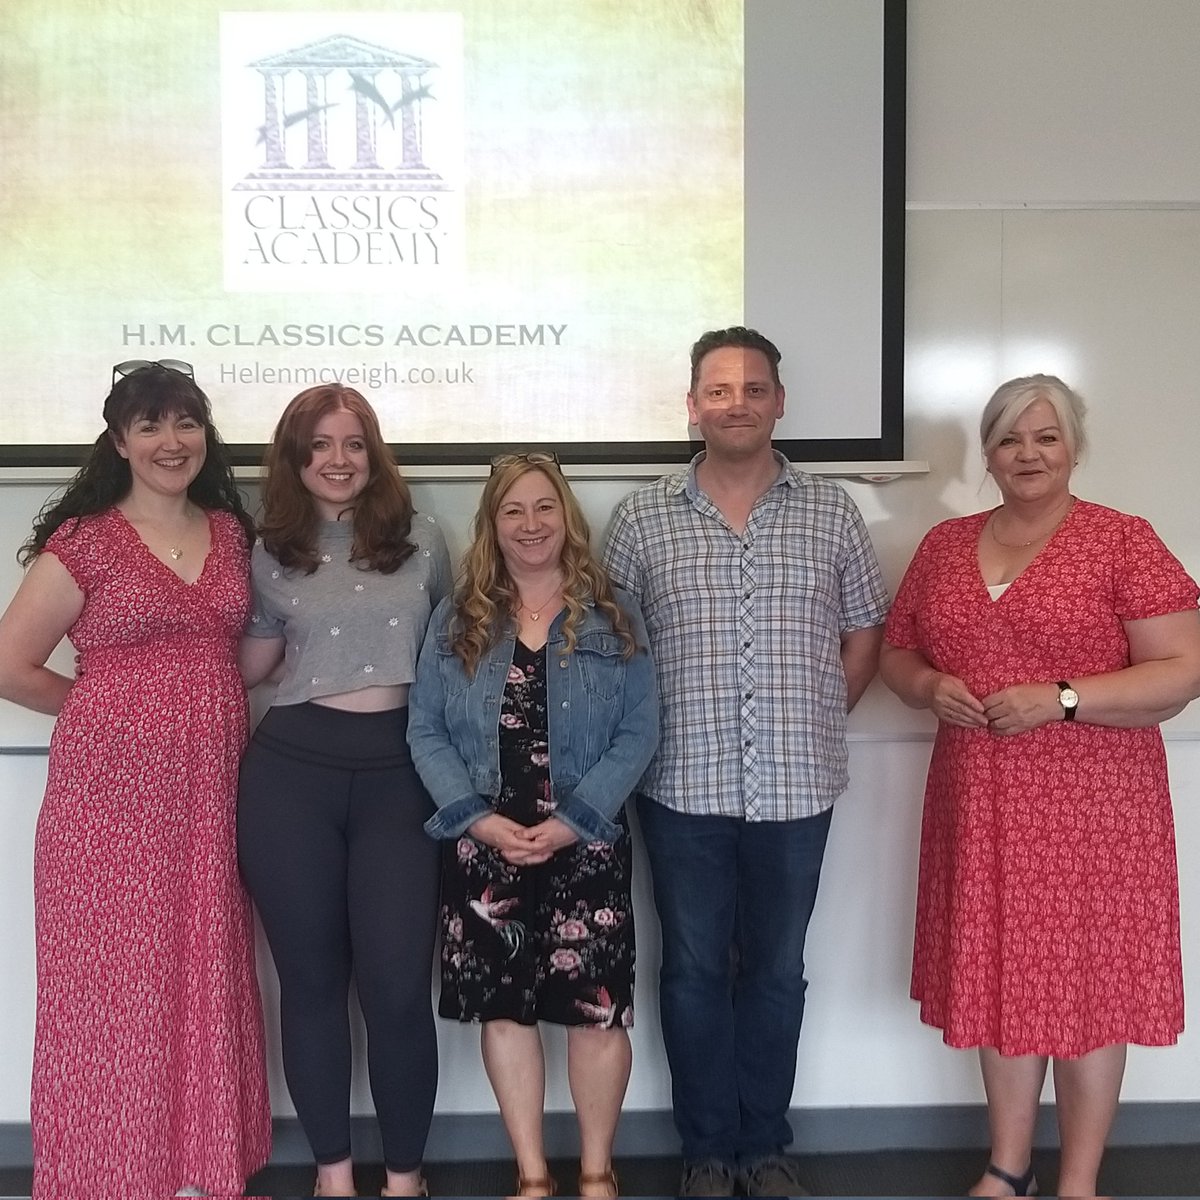 I can hardly believe this was a year ago!

It's almost time to do it all again, teaching Greek and Latin to enthusiastic and inspiring students. 

#ClassicsTwitter #ancientgreek #Greek #ClassicalGreek #Latin #ancientlanguages #summer #intensivecourse